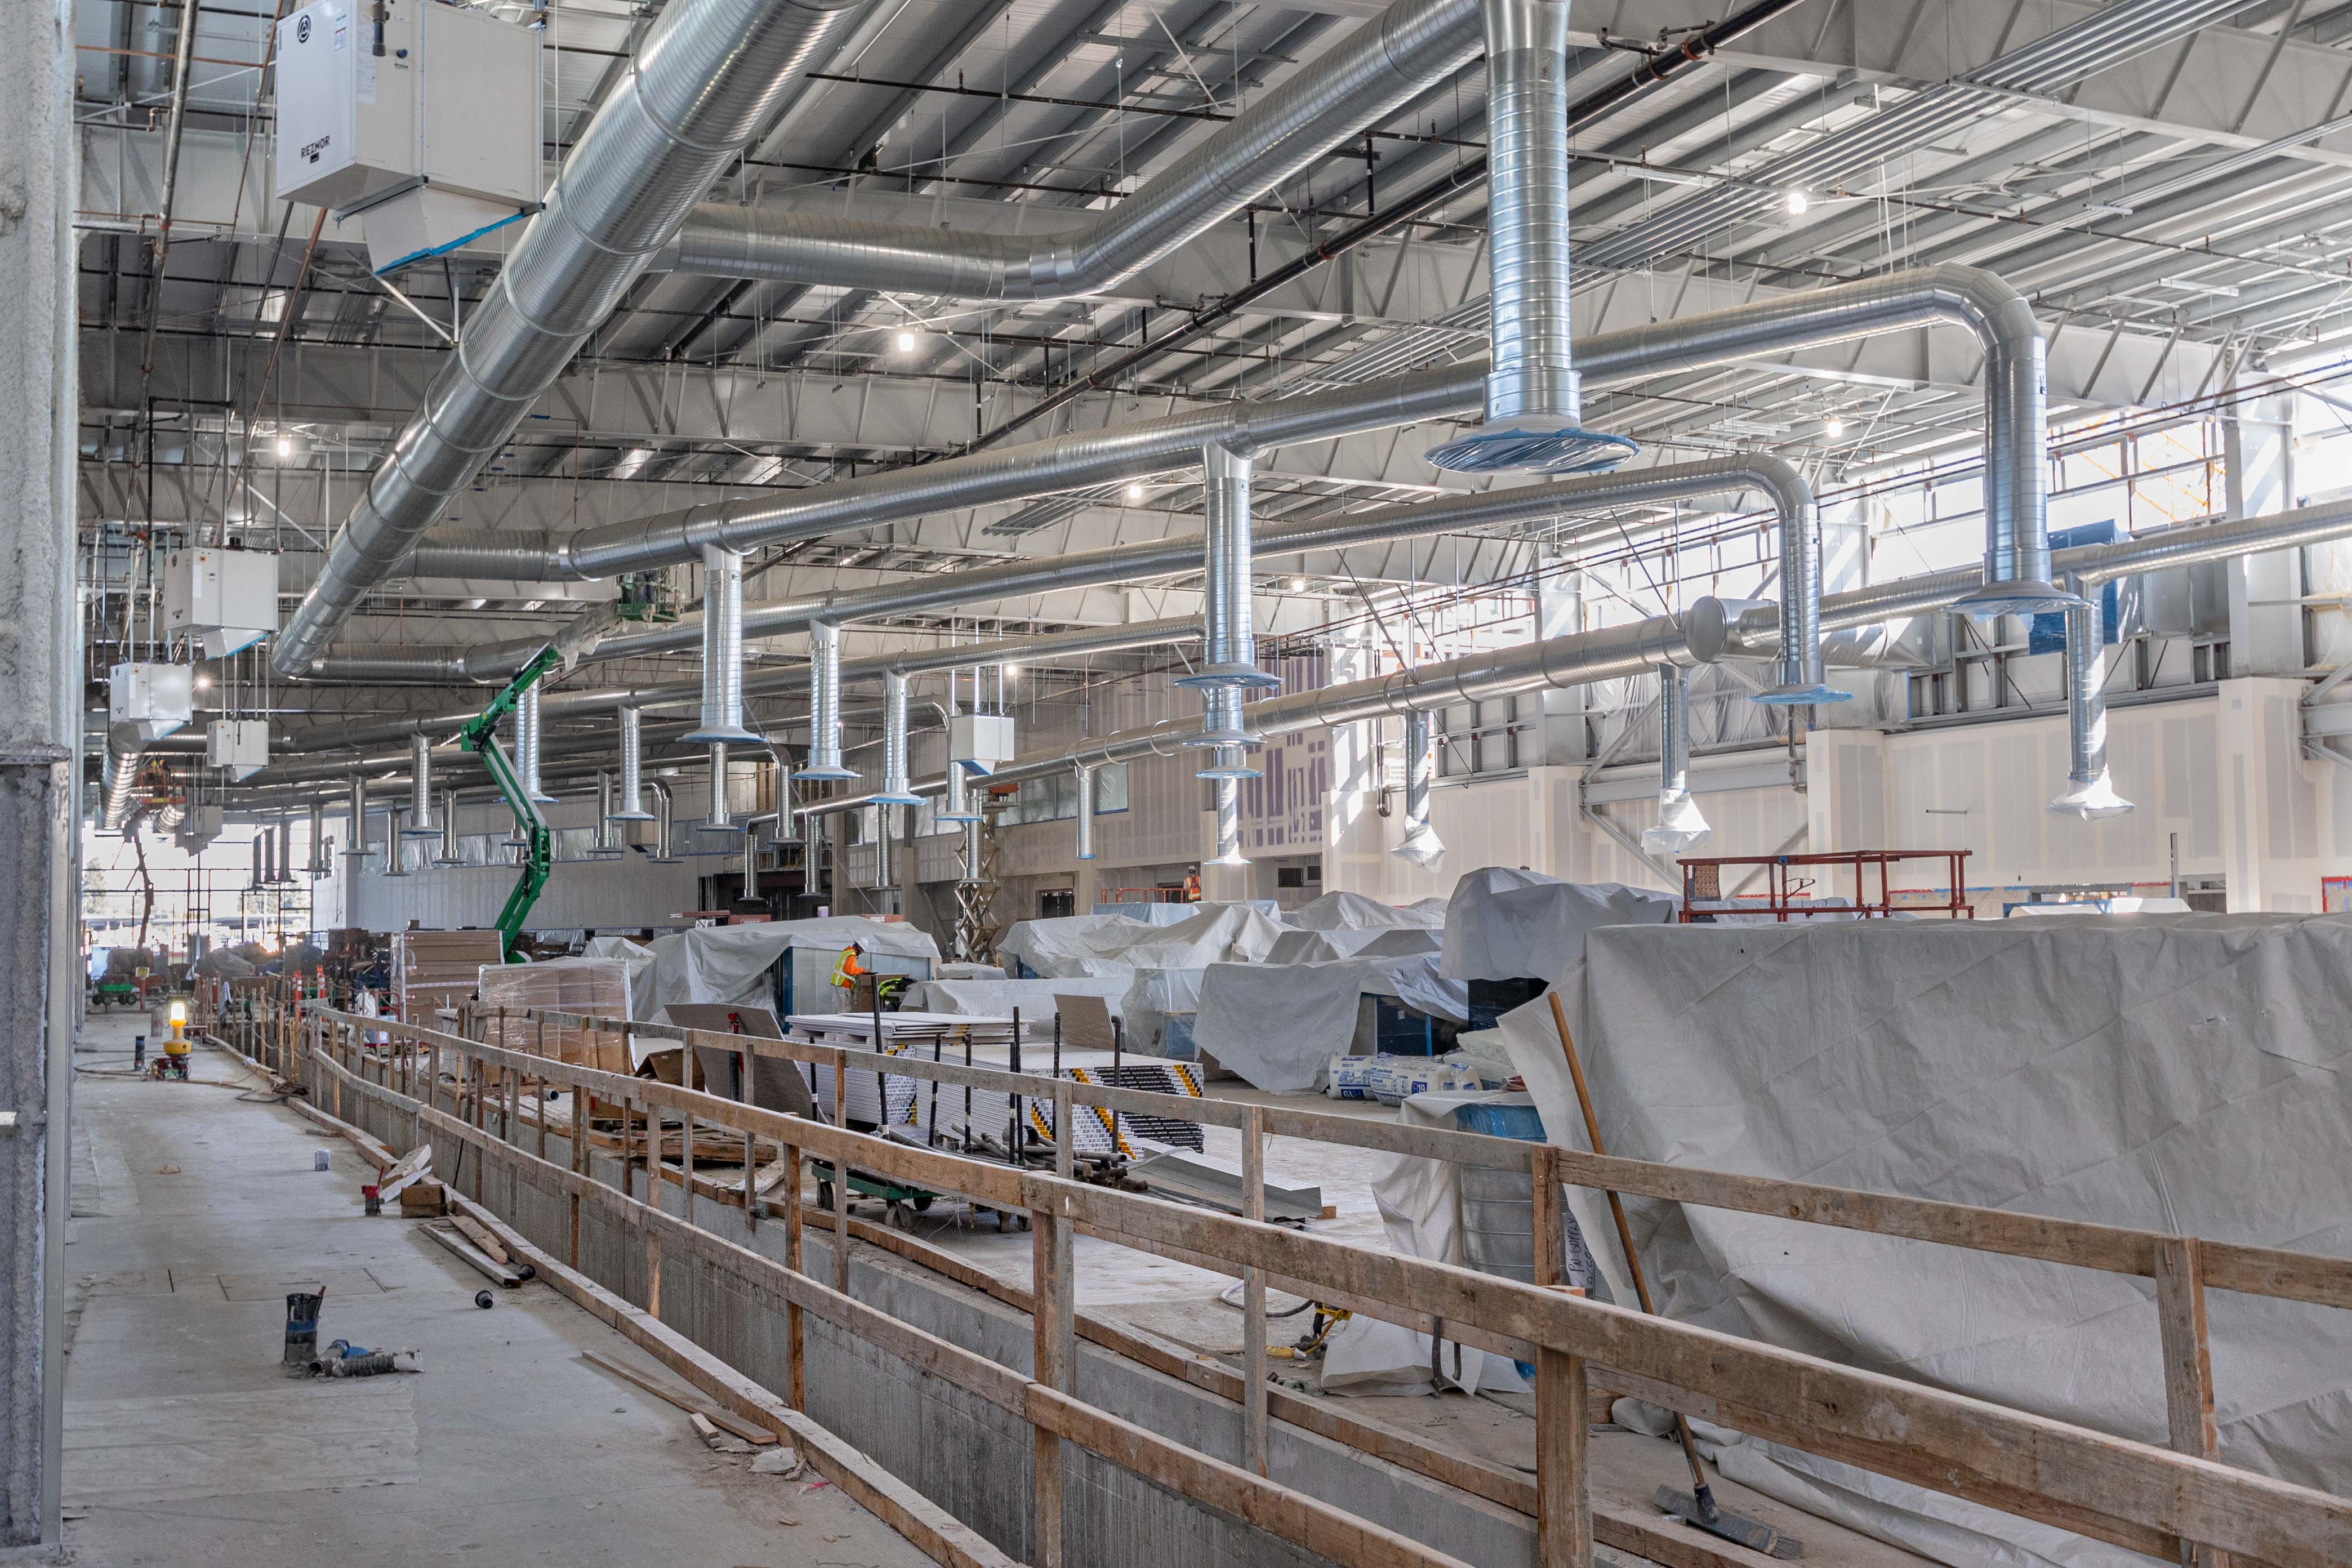 At the APM system's future Maintenance and Storage Facility, ductwork and drywall installation continues as the building interior takes shape.